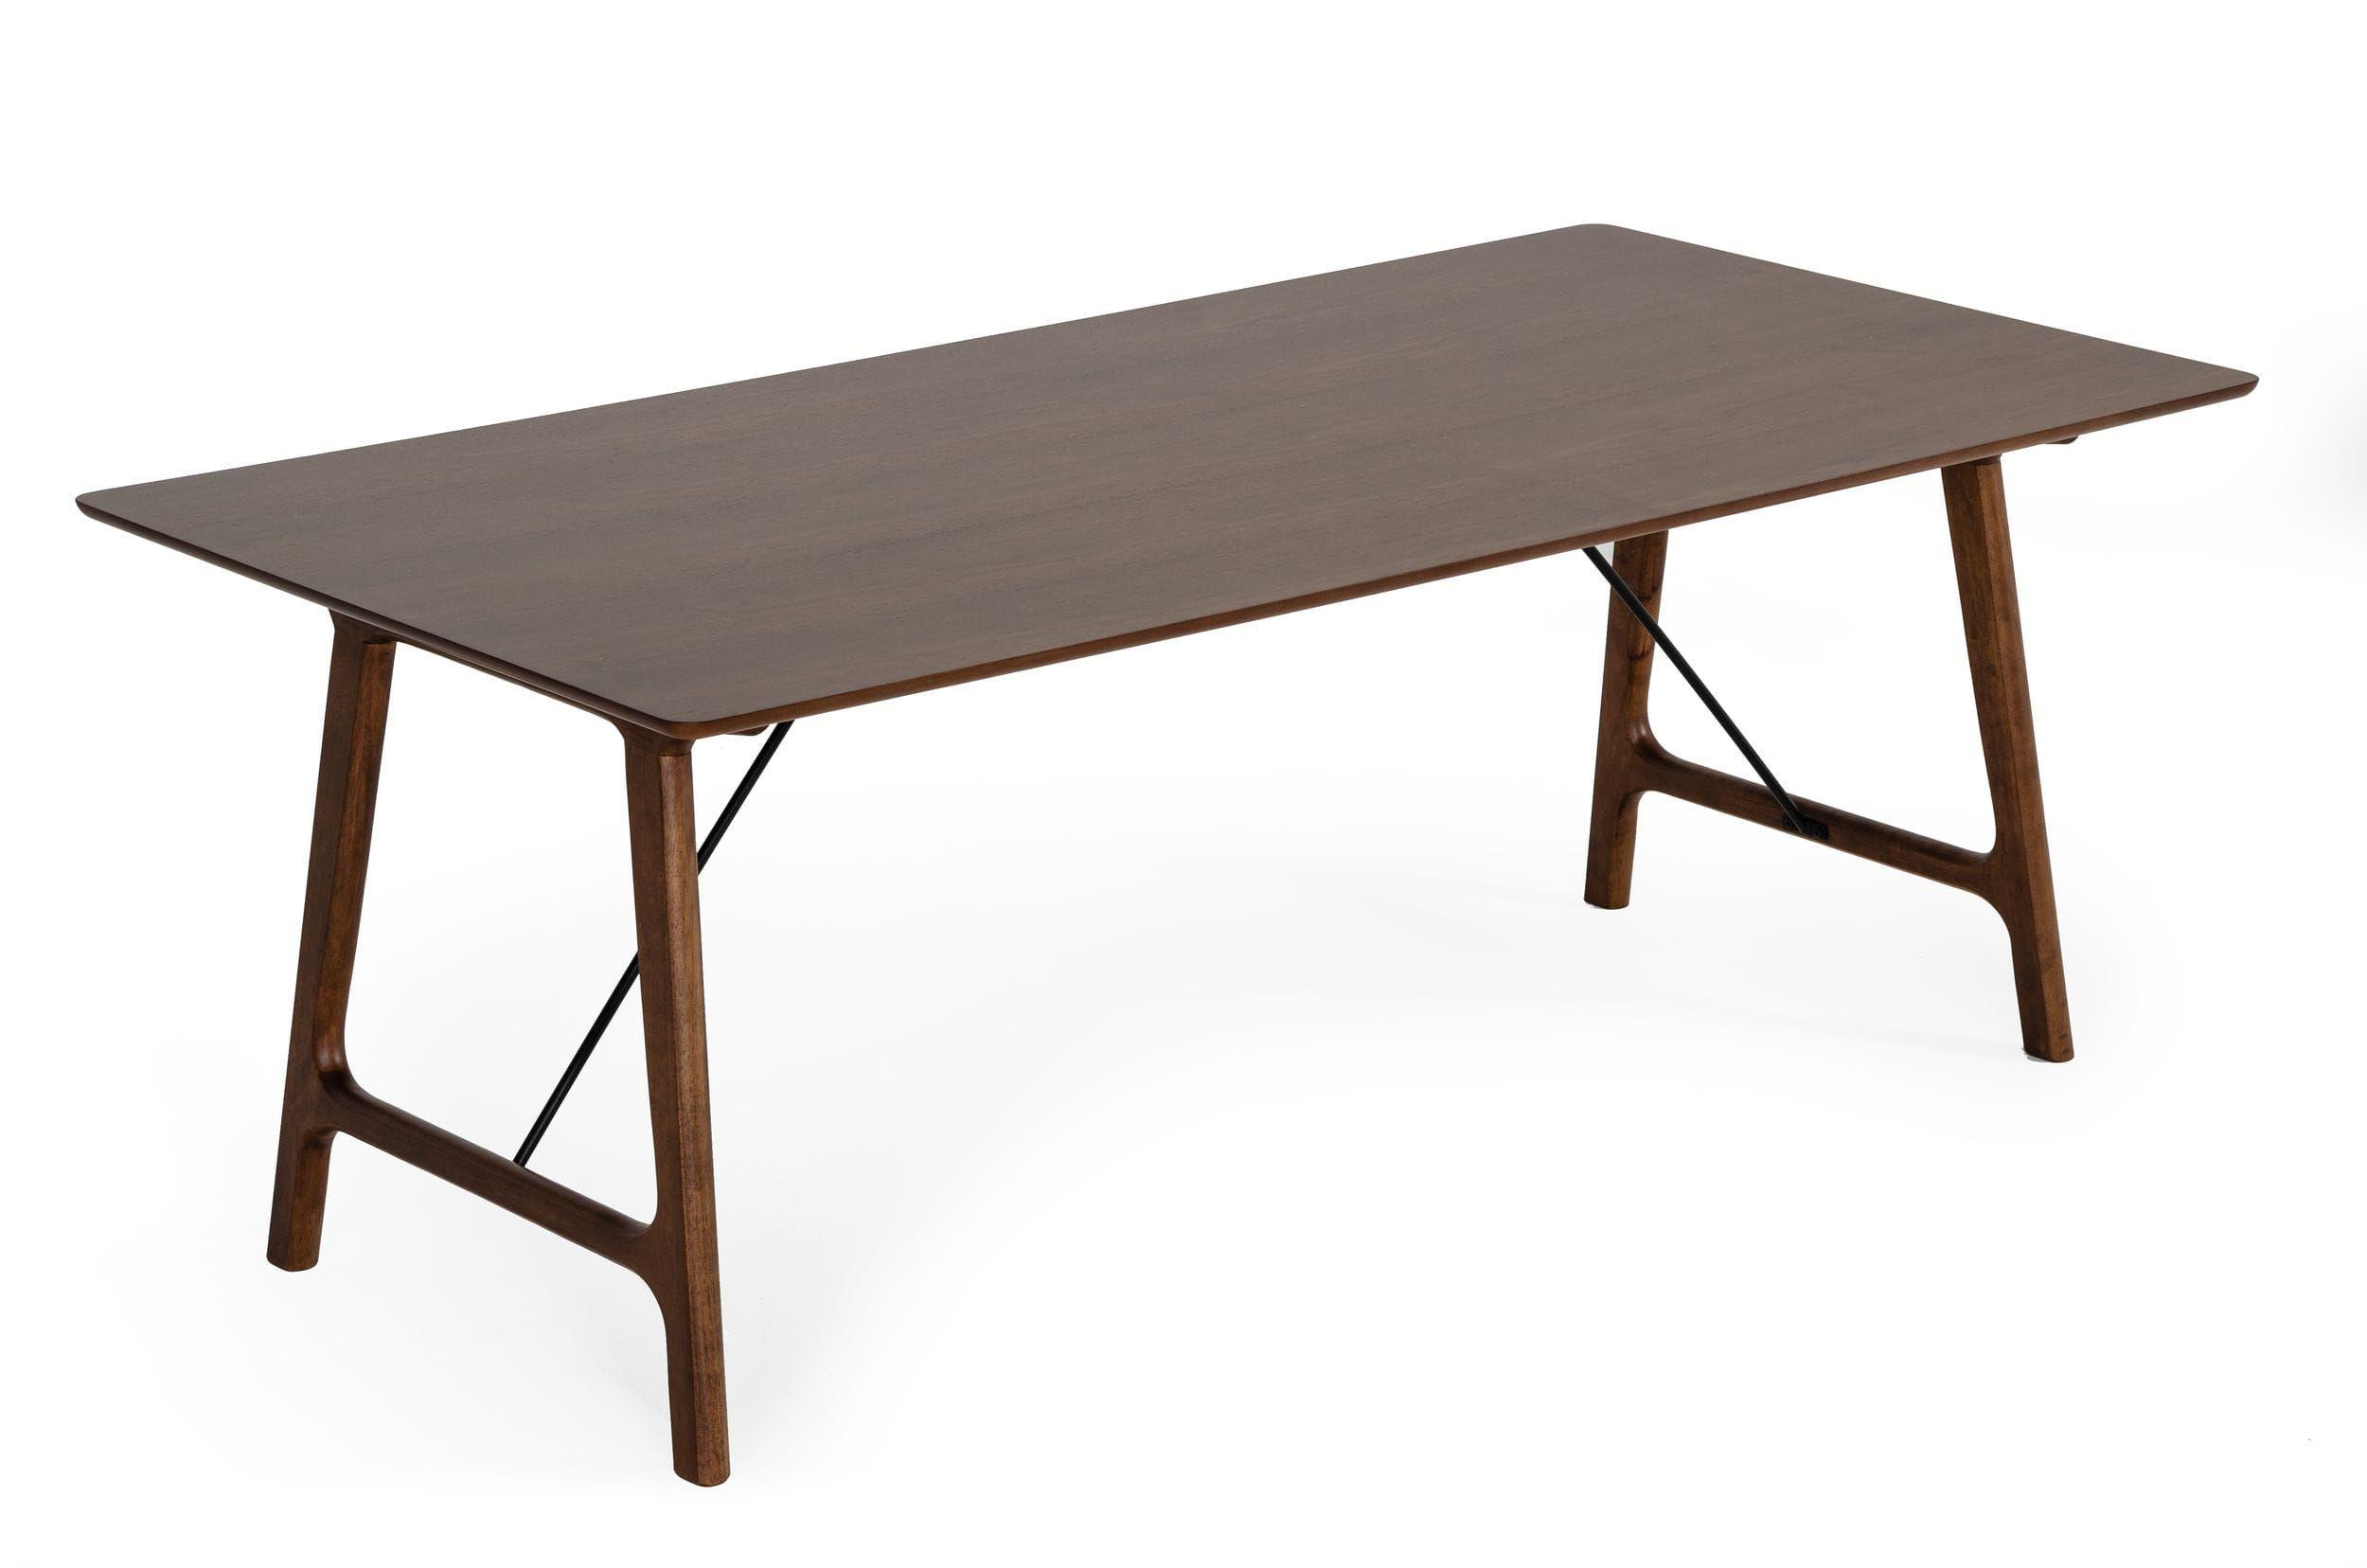 Contemporary, Modern Dining Table Oritz VGMAMIT-5157 in Walnut 